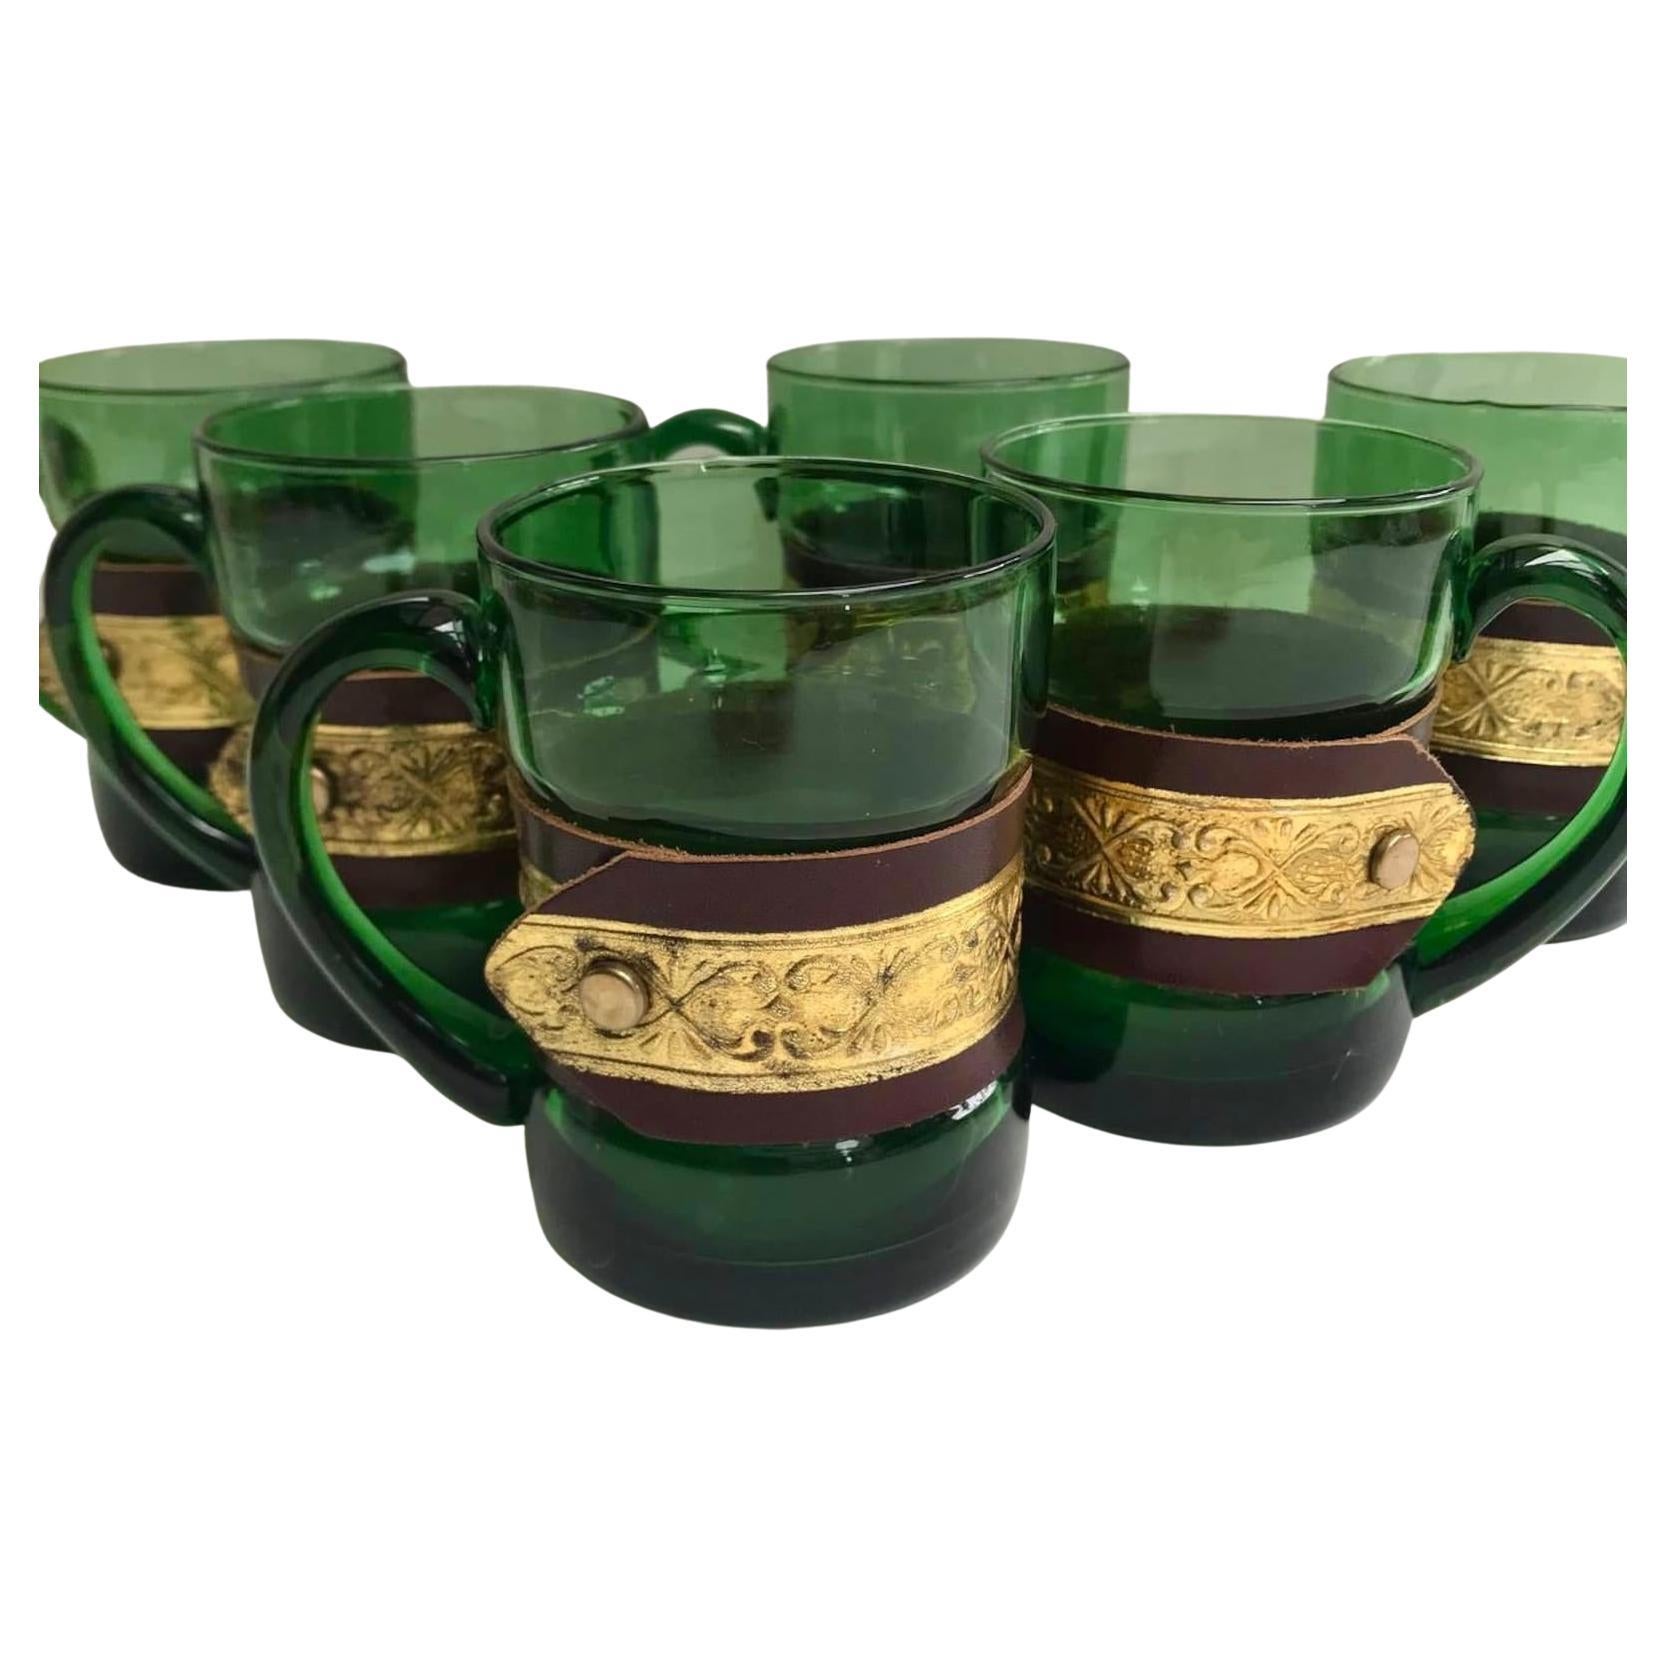 Colourful vintage glass mugs in a Beautiful Emerald Color.

The handmade decorative belts are detachable.

France. 

Set of 6 pieces. 

The Price for the set of 6.

In excellent condition, no chips, cracks or crazing. 

Size:

Height -